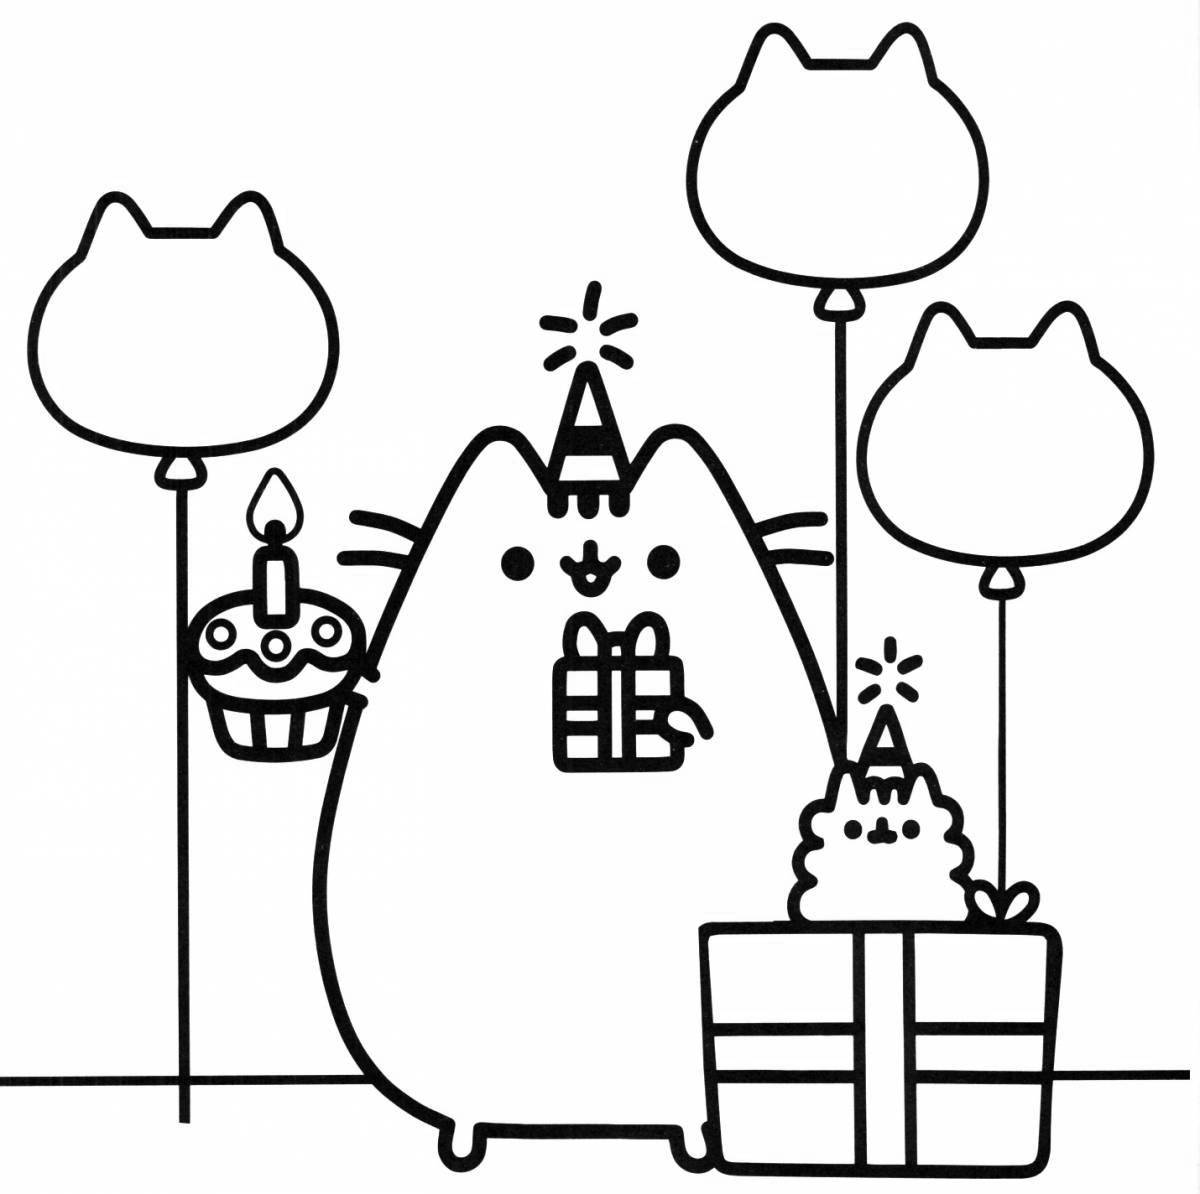 Vibrant pusheen coloring page